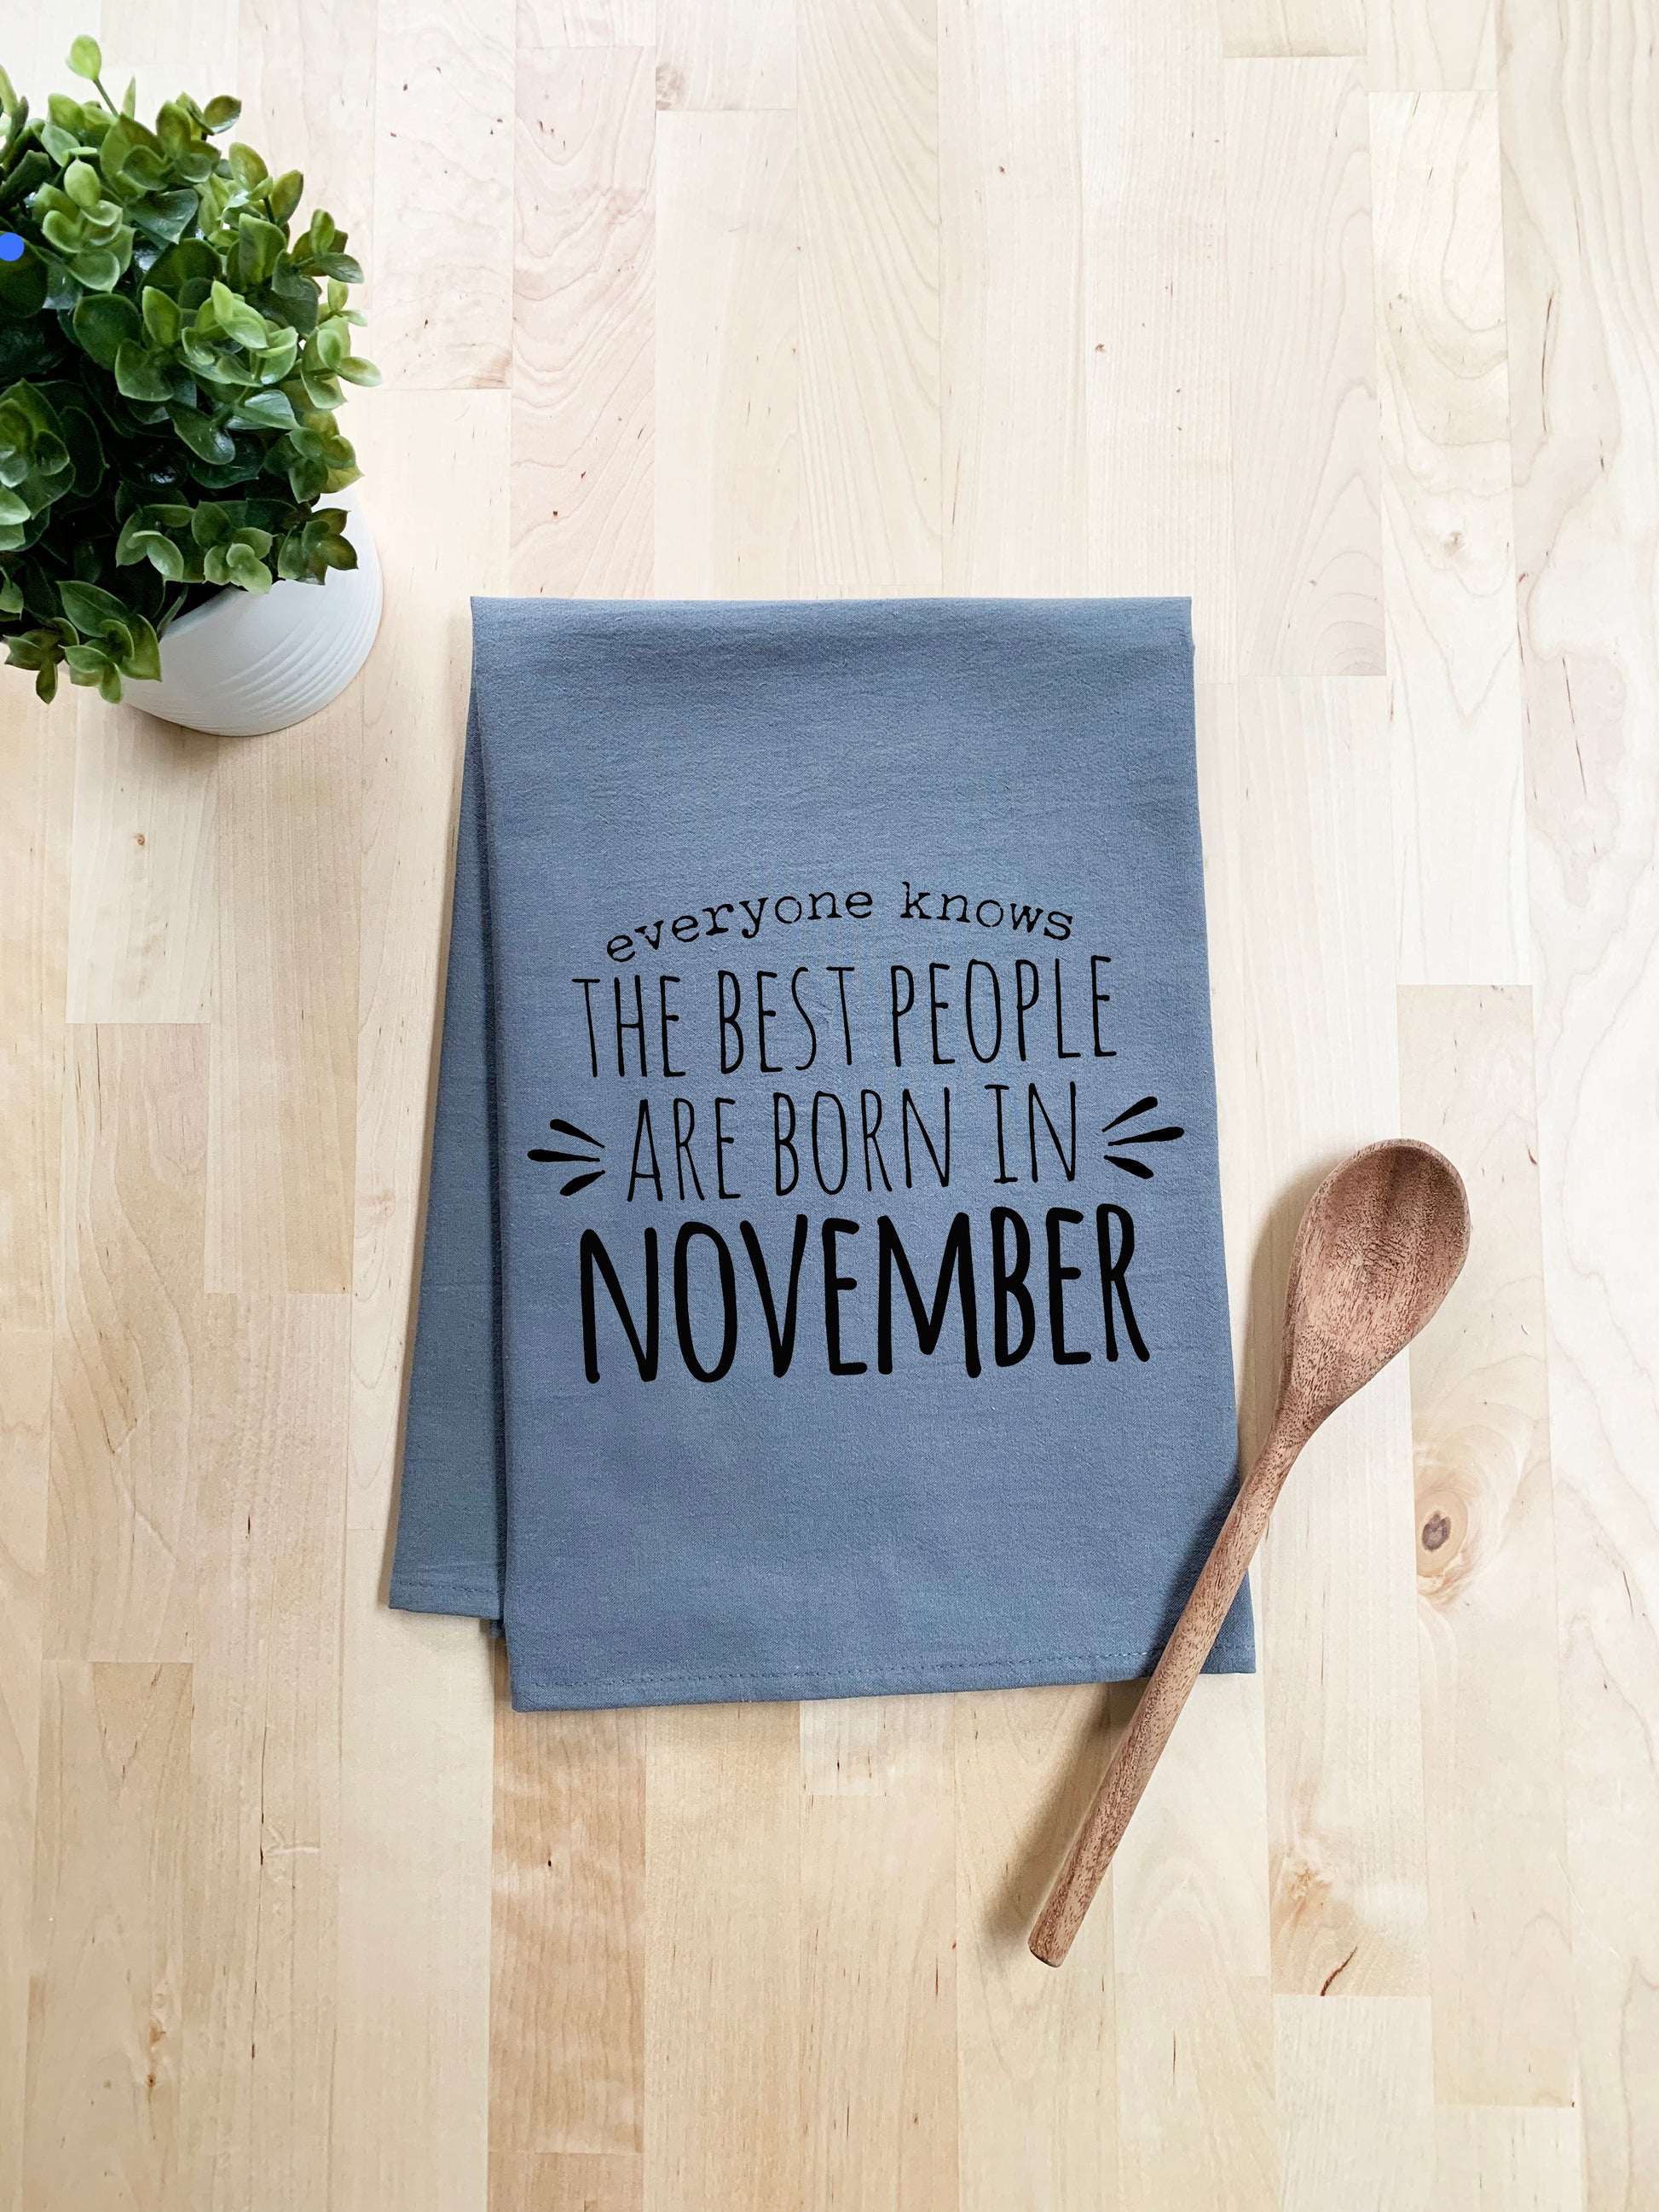 The Best People Are Born In November - Dish Towel - White Or Gray - MoonlightMakers